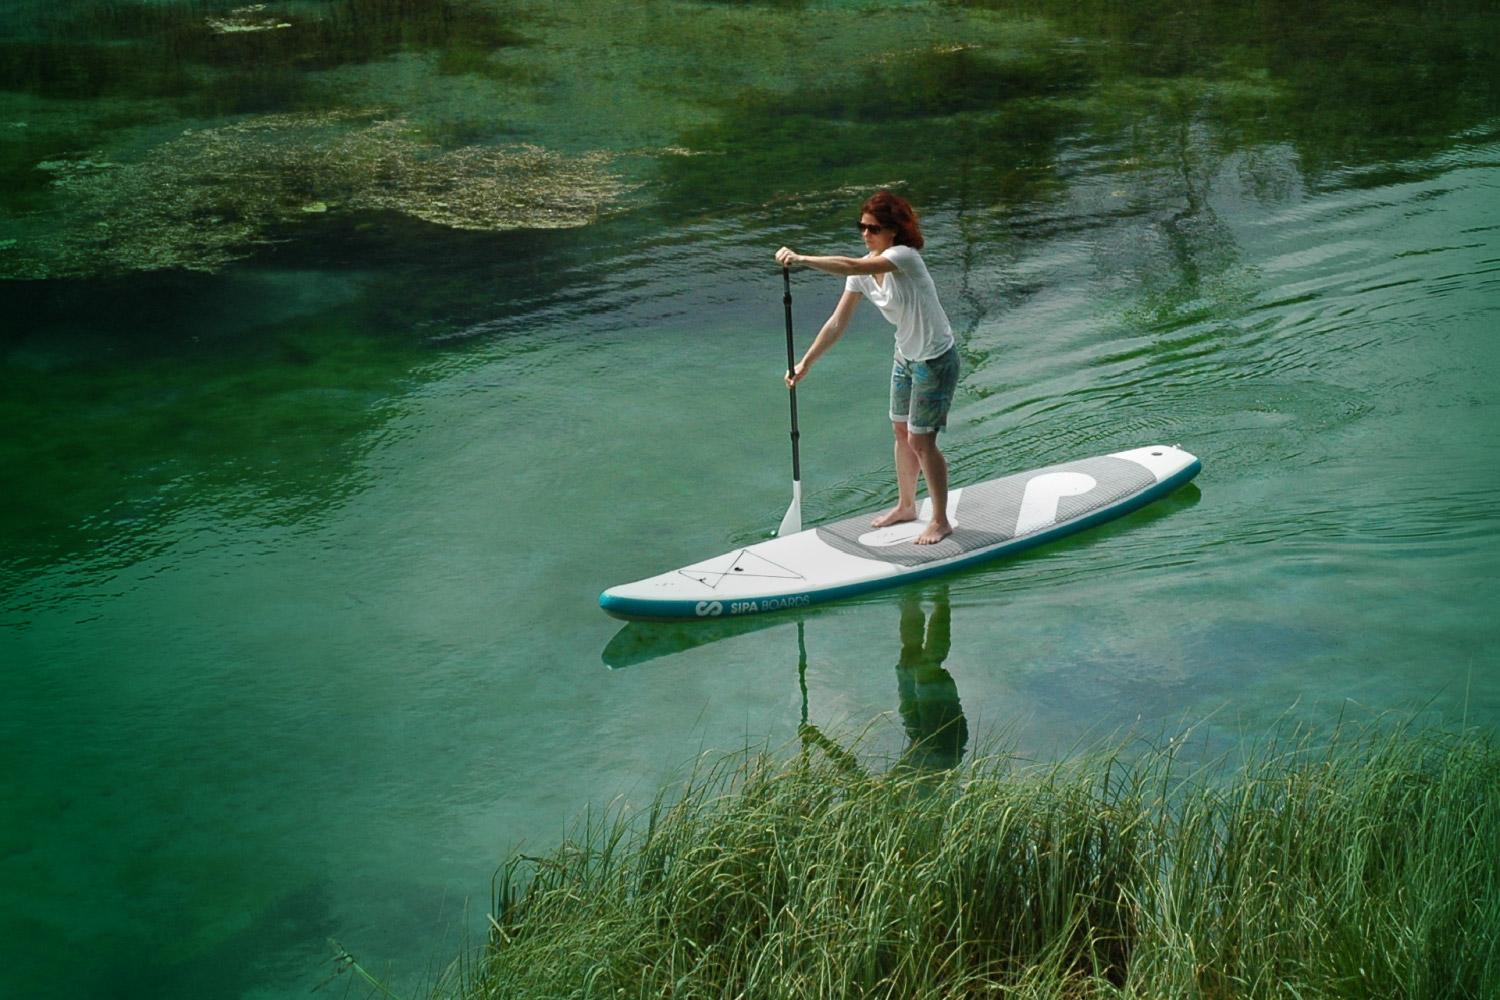 Trekking: The SipaBoard is the SUP of the 21st century